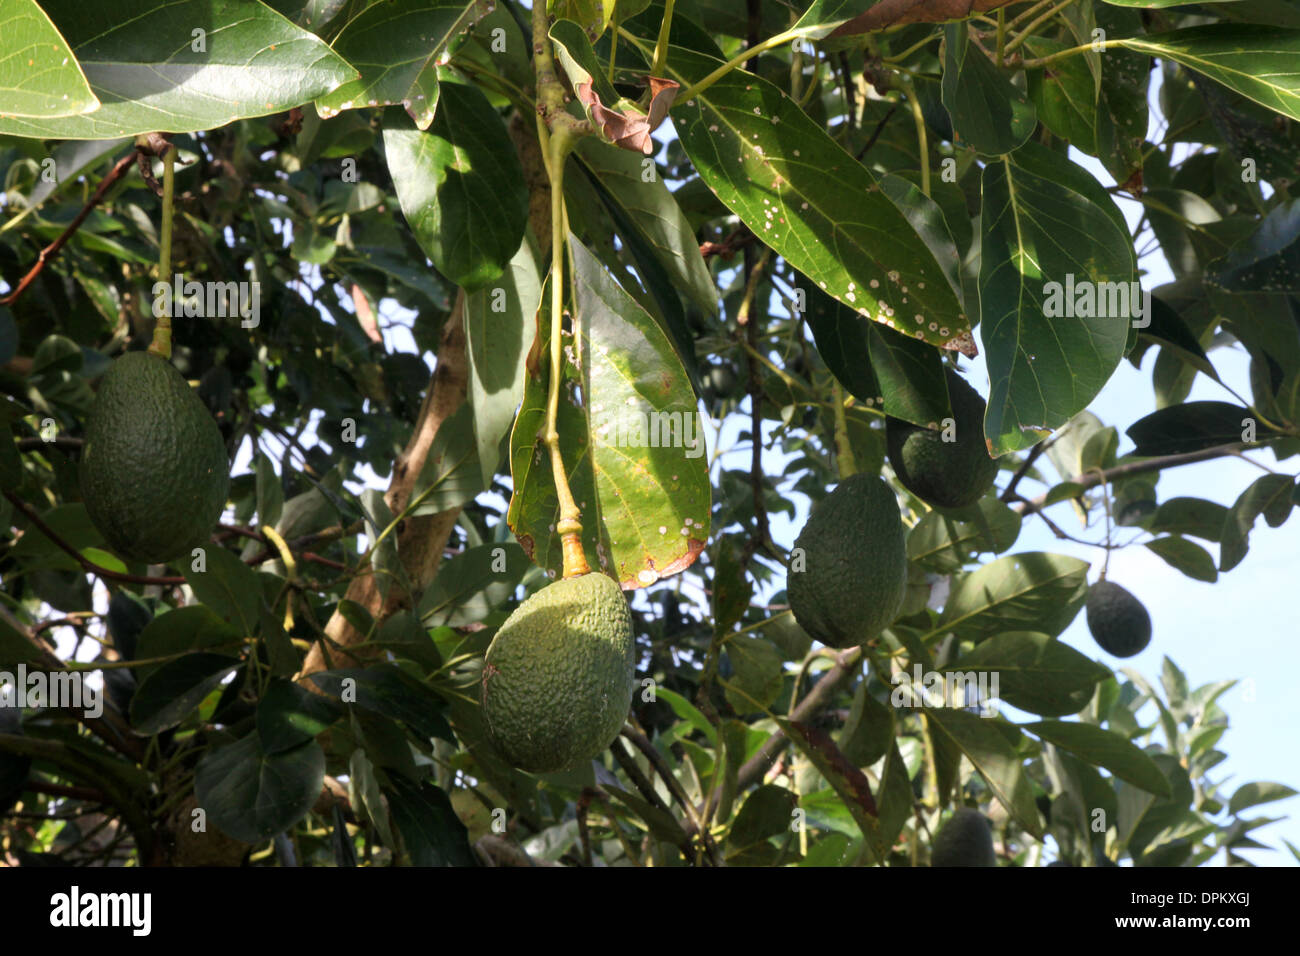 A full crop of green ripe Avocado fruit growing on a tree in Hawaii Stock Photo